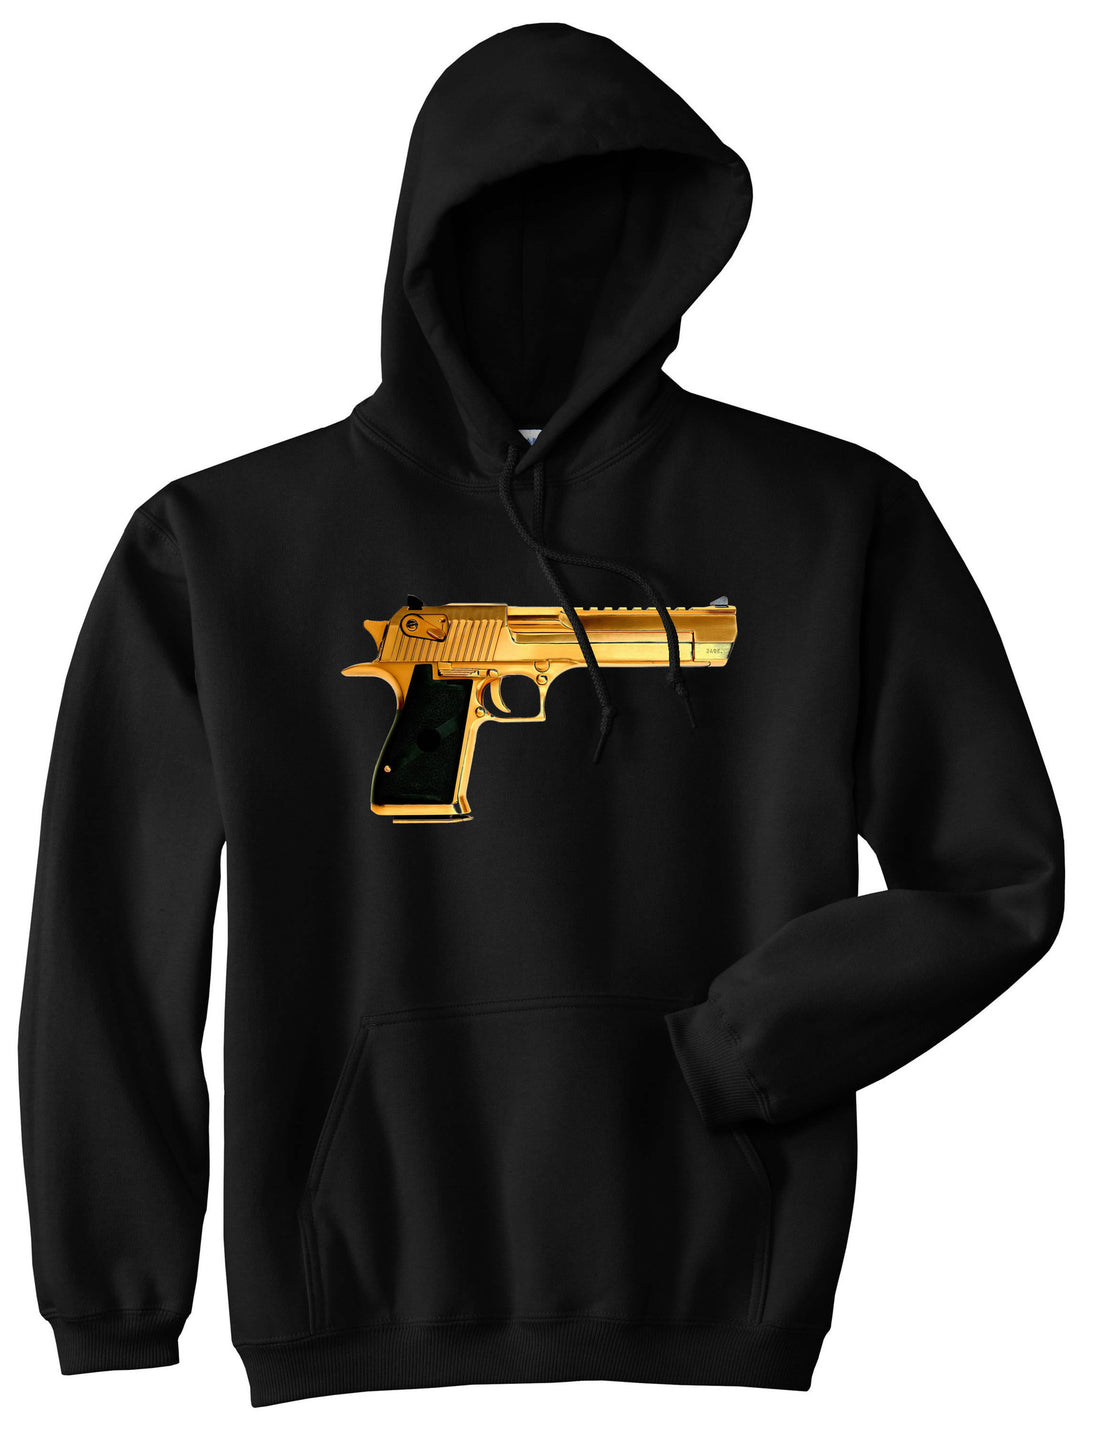 Gold Gun 9mm Revolver Chrome 45 Pullover Hoodie Hoody In Black by Kings Of NY